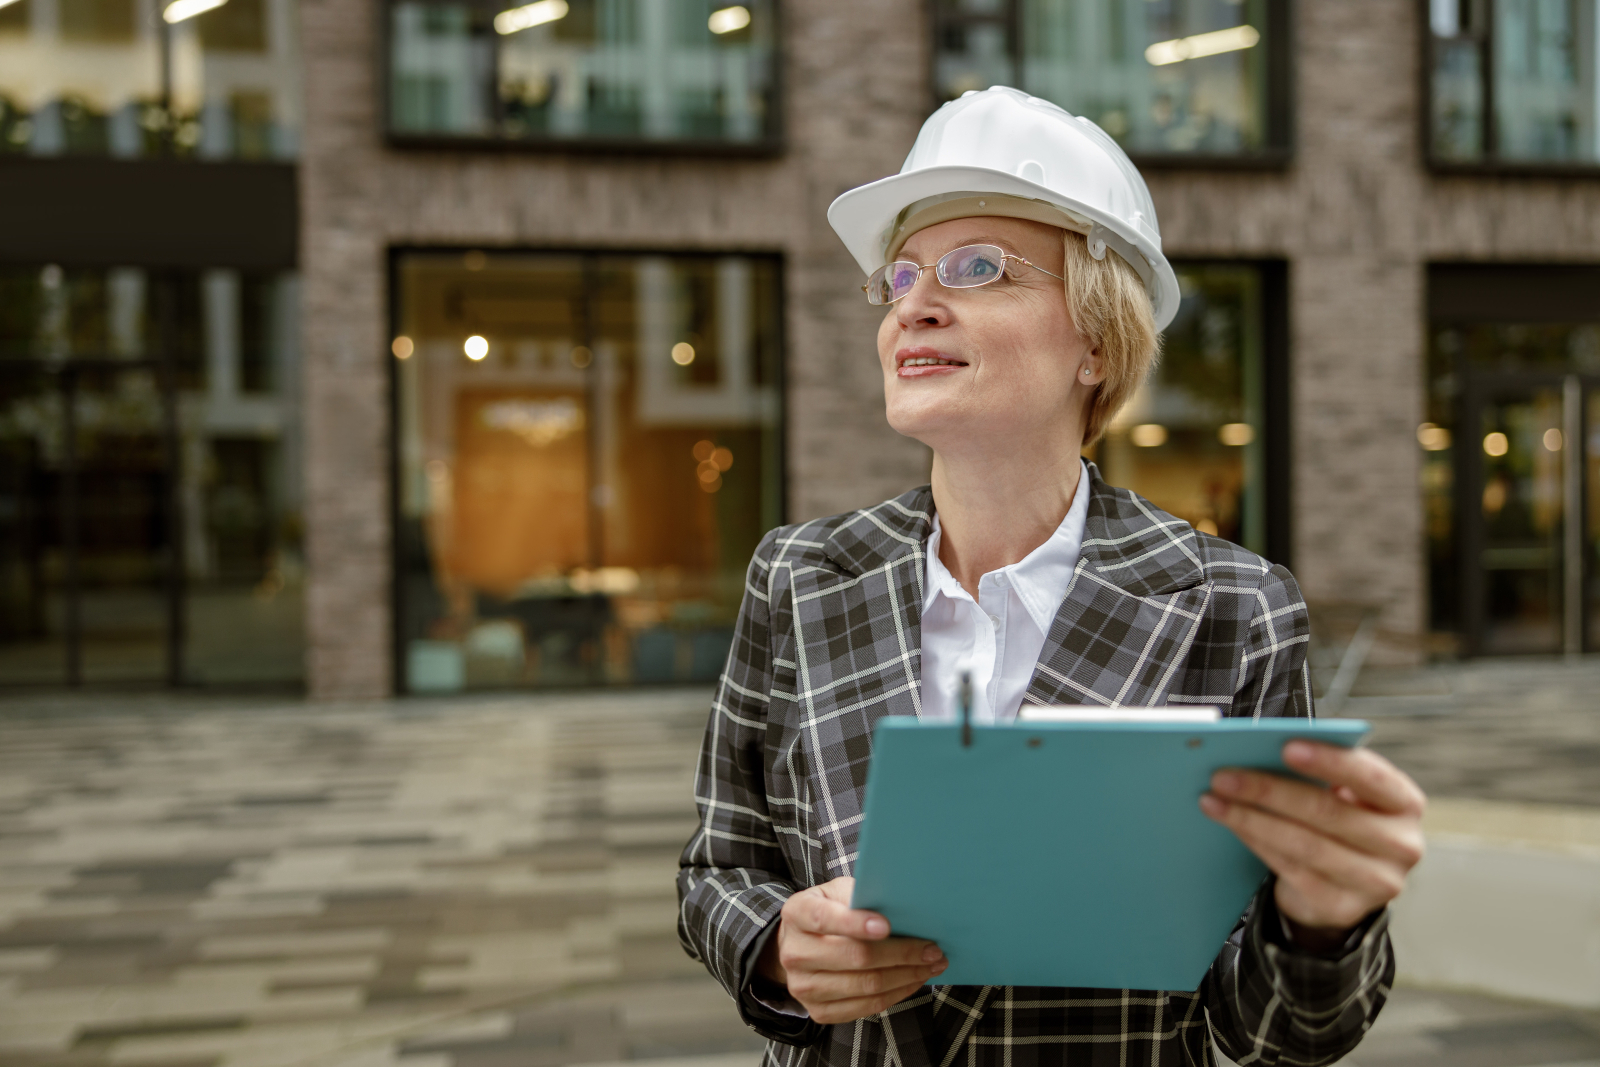 Image of a female building inspector with a clipboard standing in front of a city building.